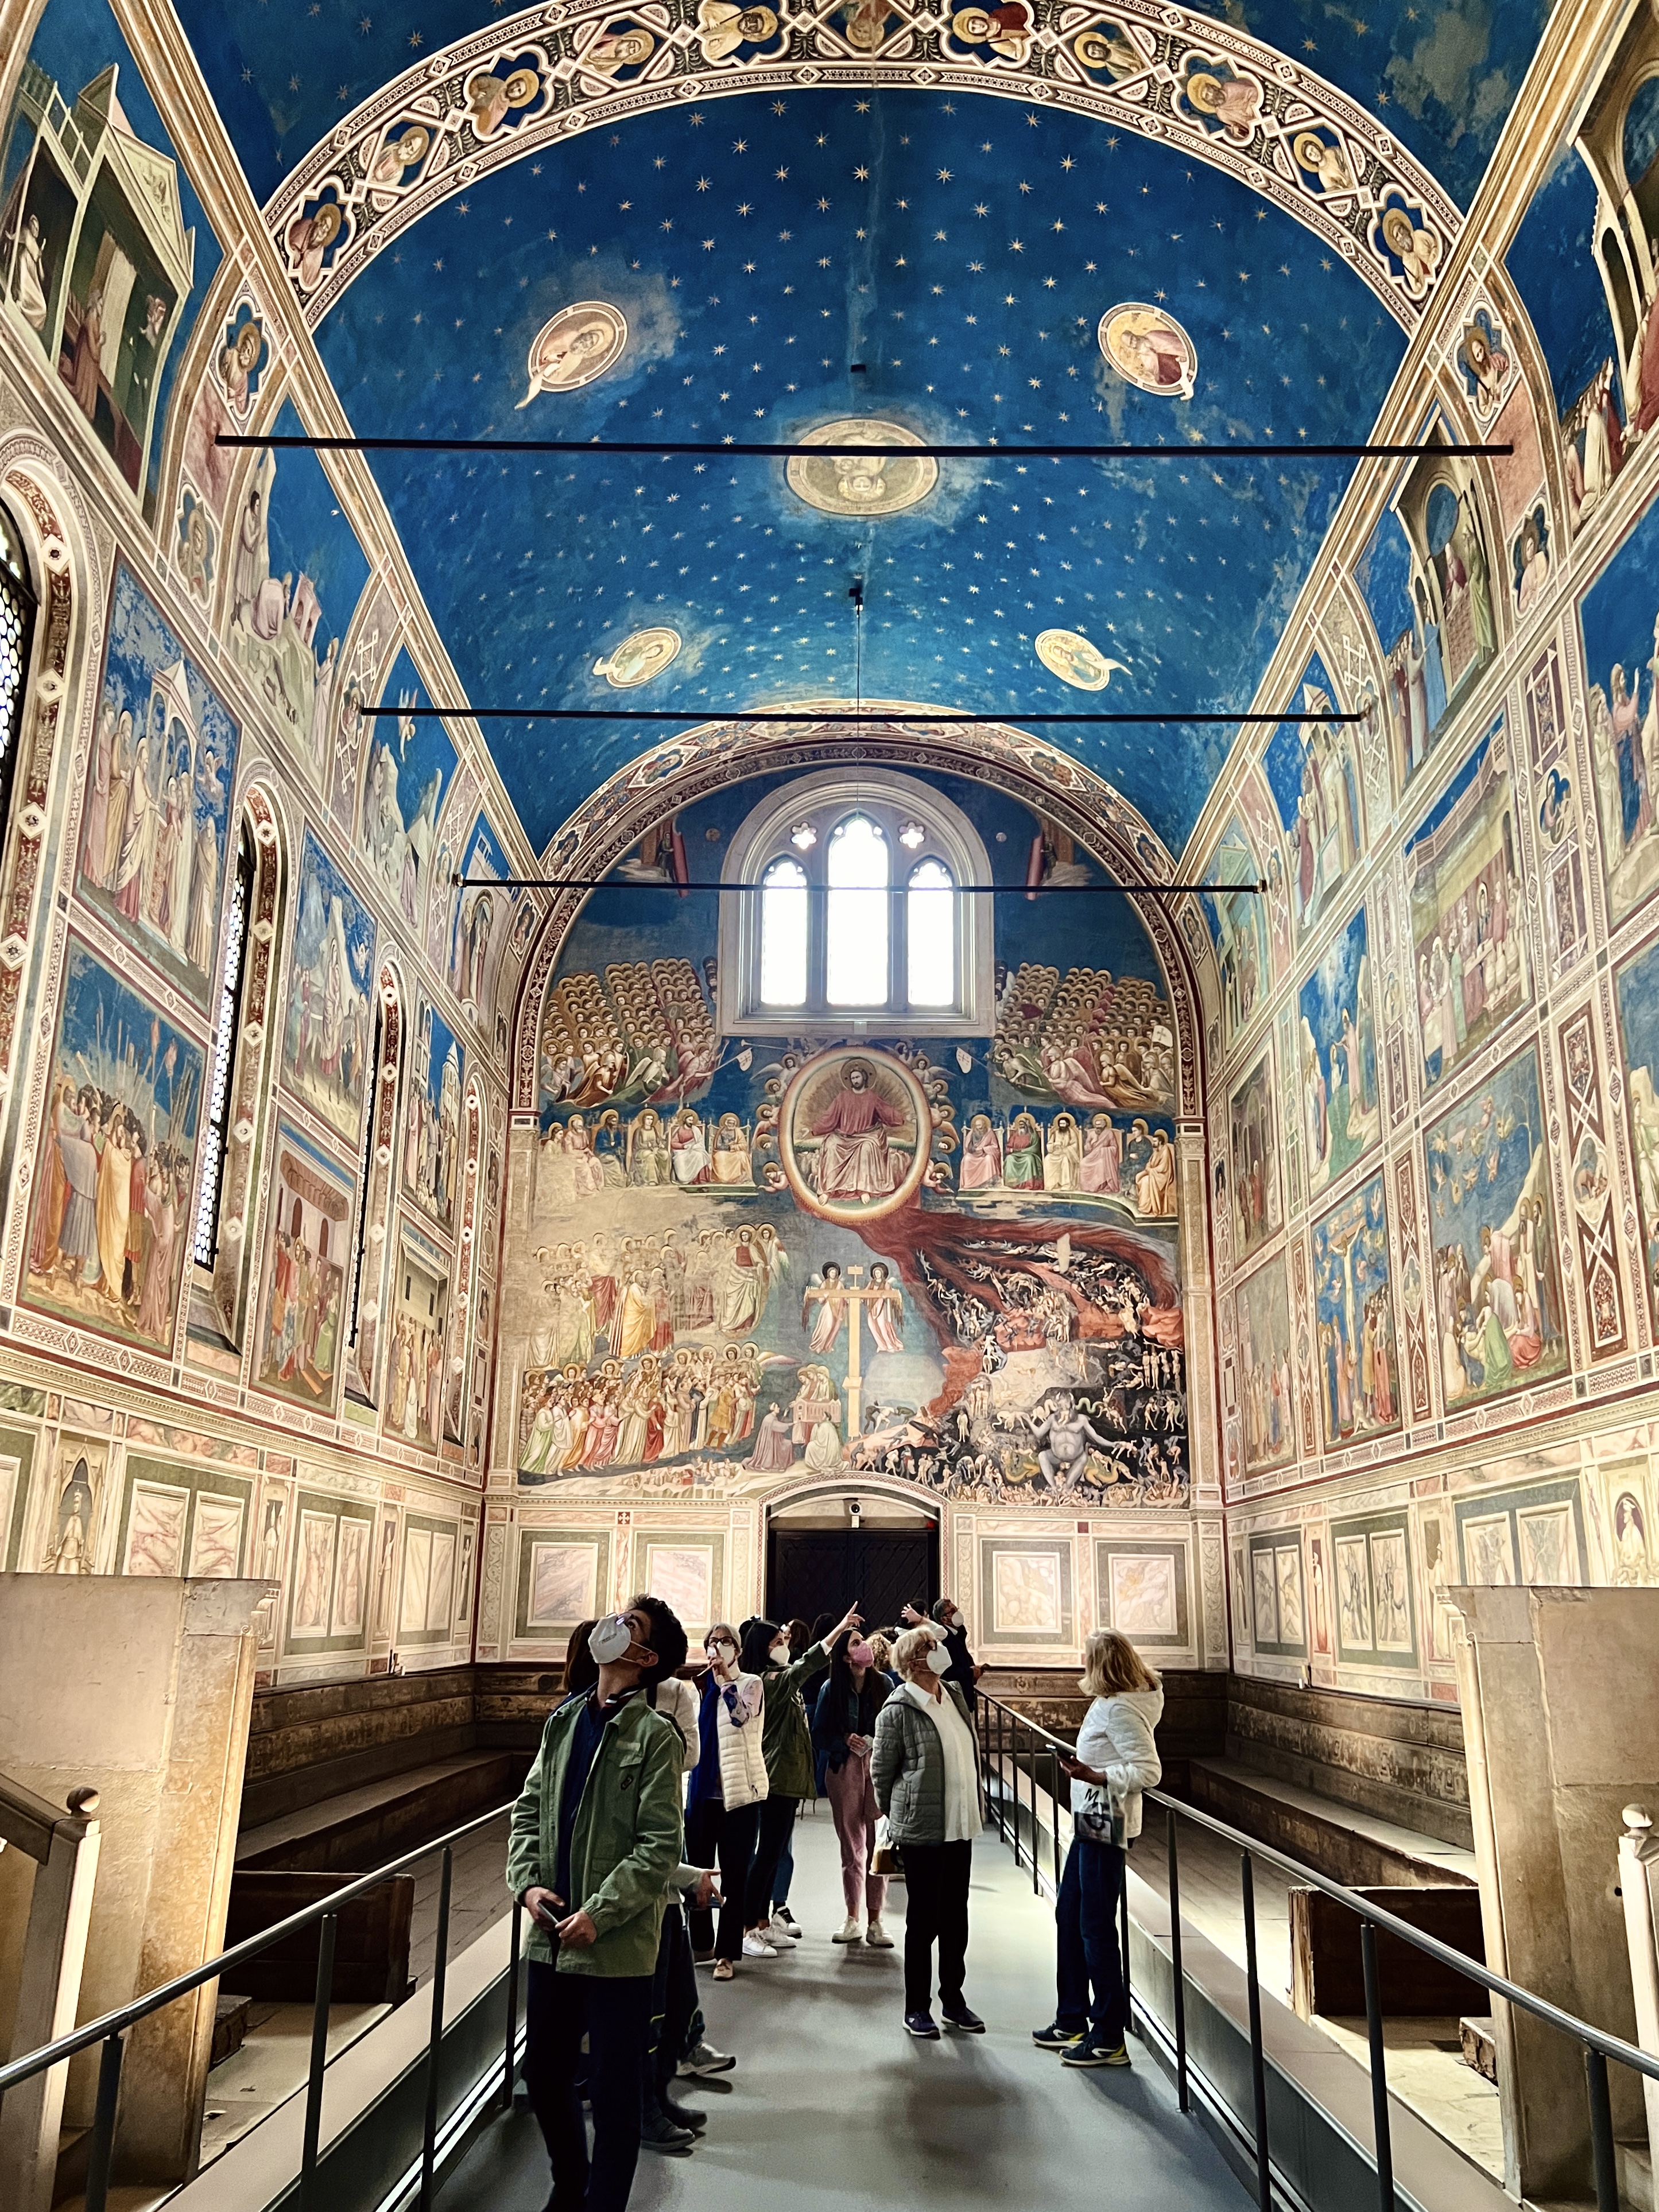 Chapel filled with blue paint and frescoes of the life of Jesus by Giotto di Bondone, Scrovegni Chapel, Padua, Northern Italy